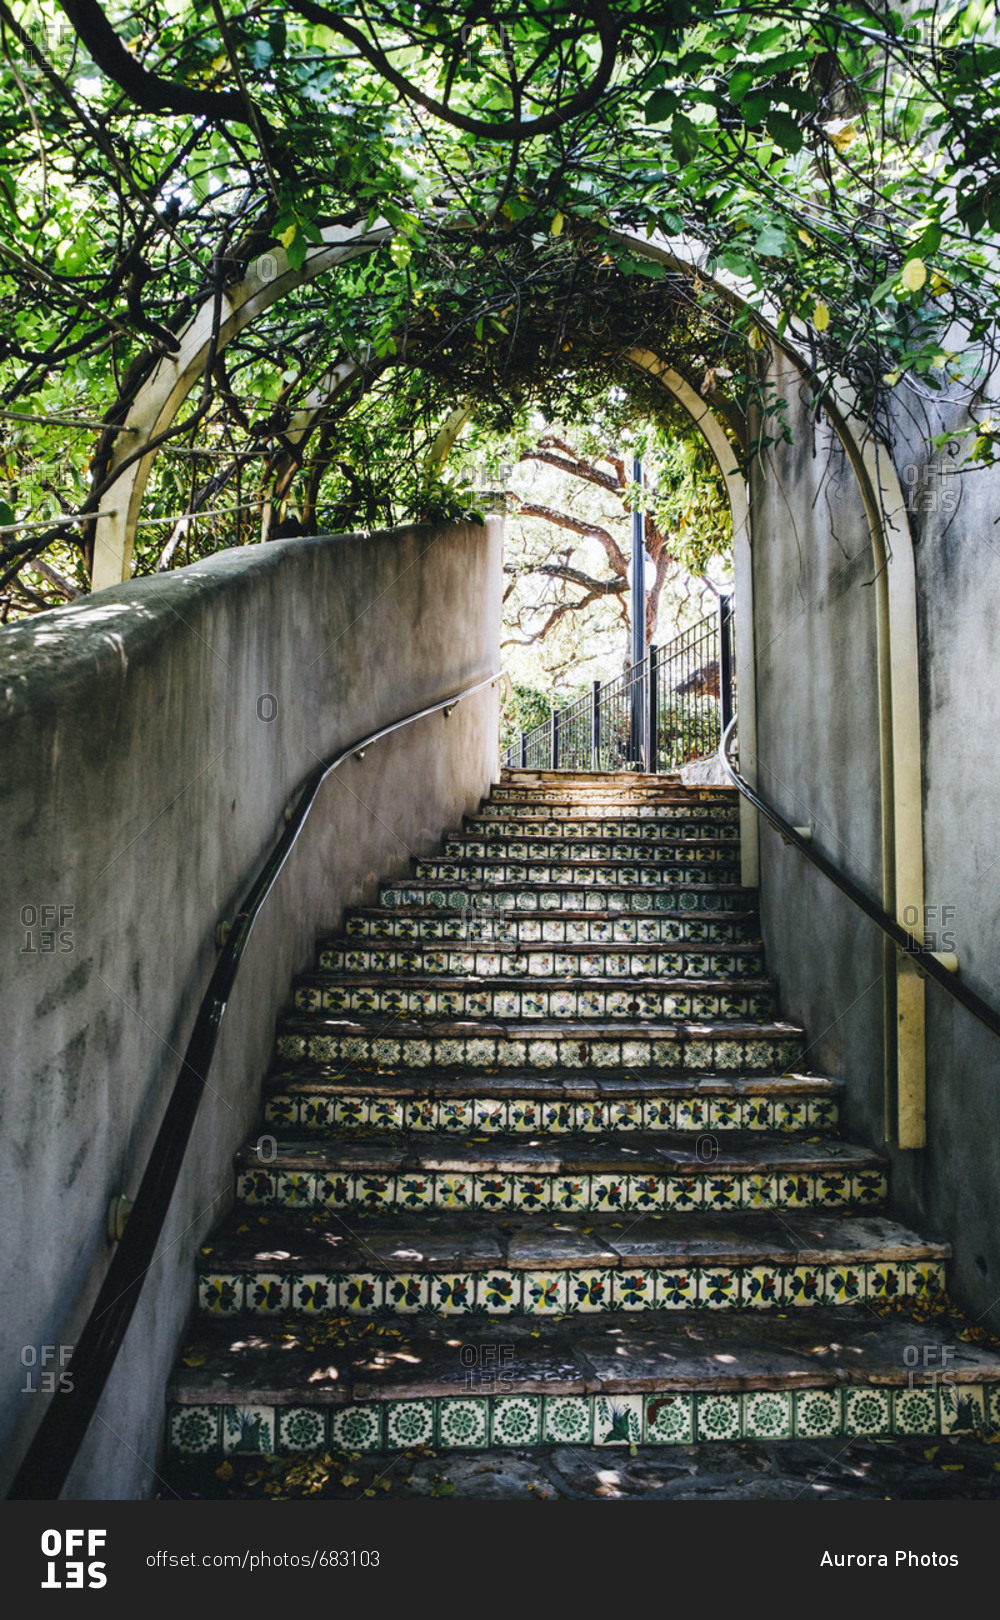 Stairs lined with tile and covered with an awning of plants lead up from the San Antonio river walk to La Villita.